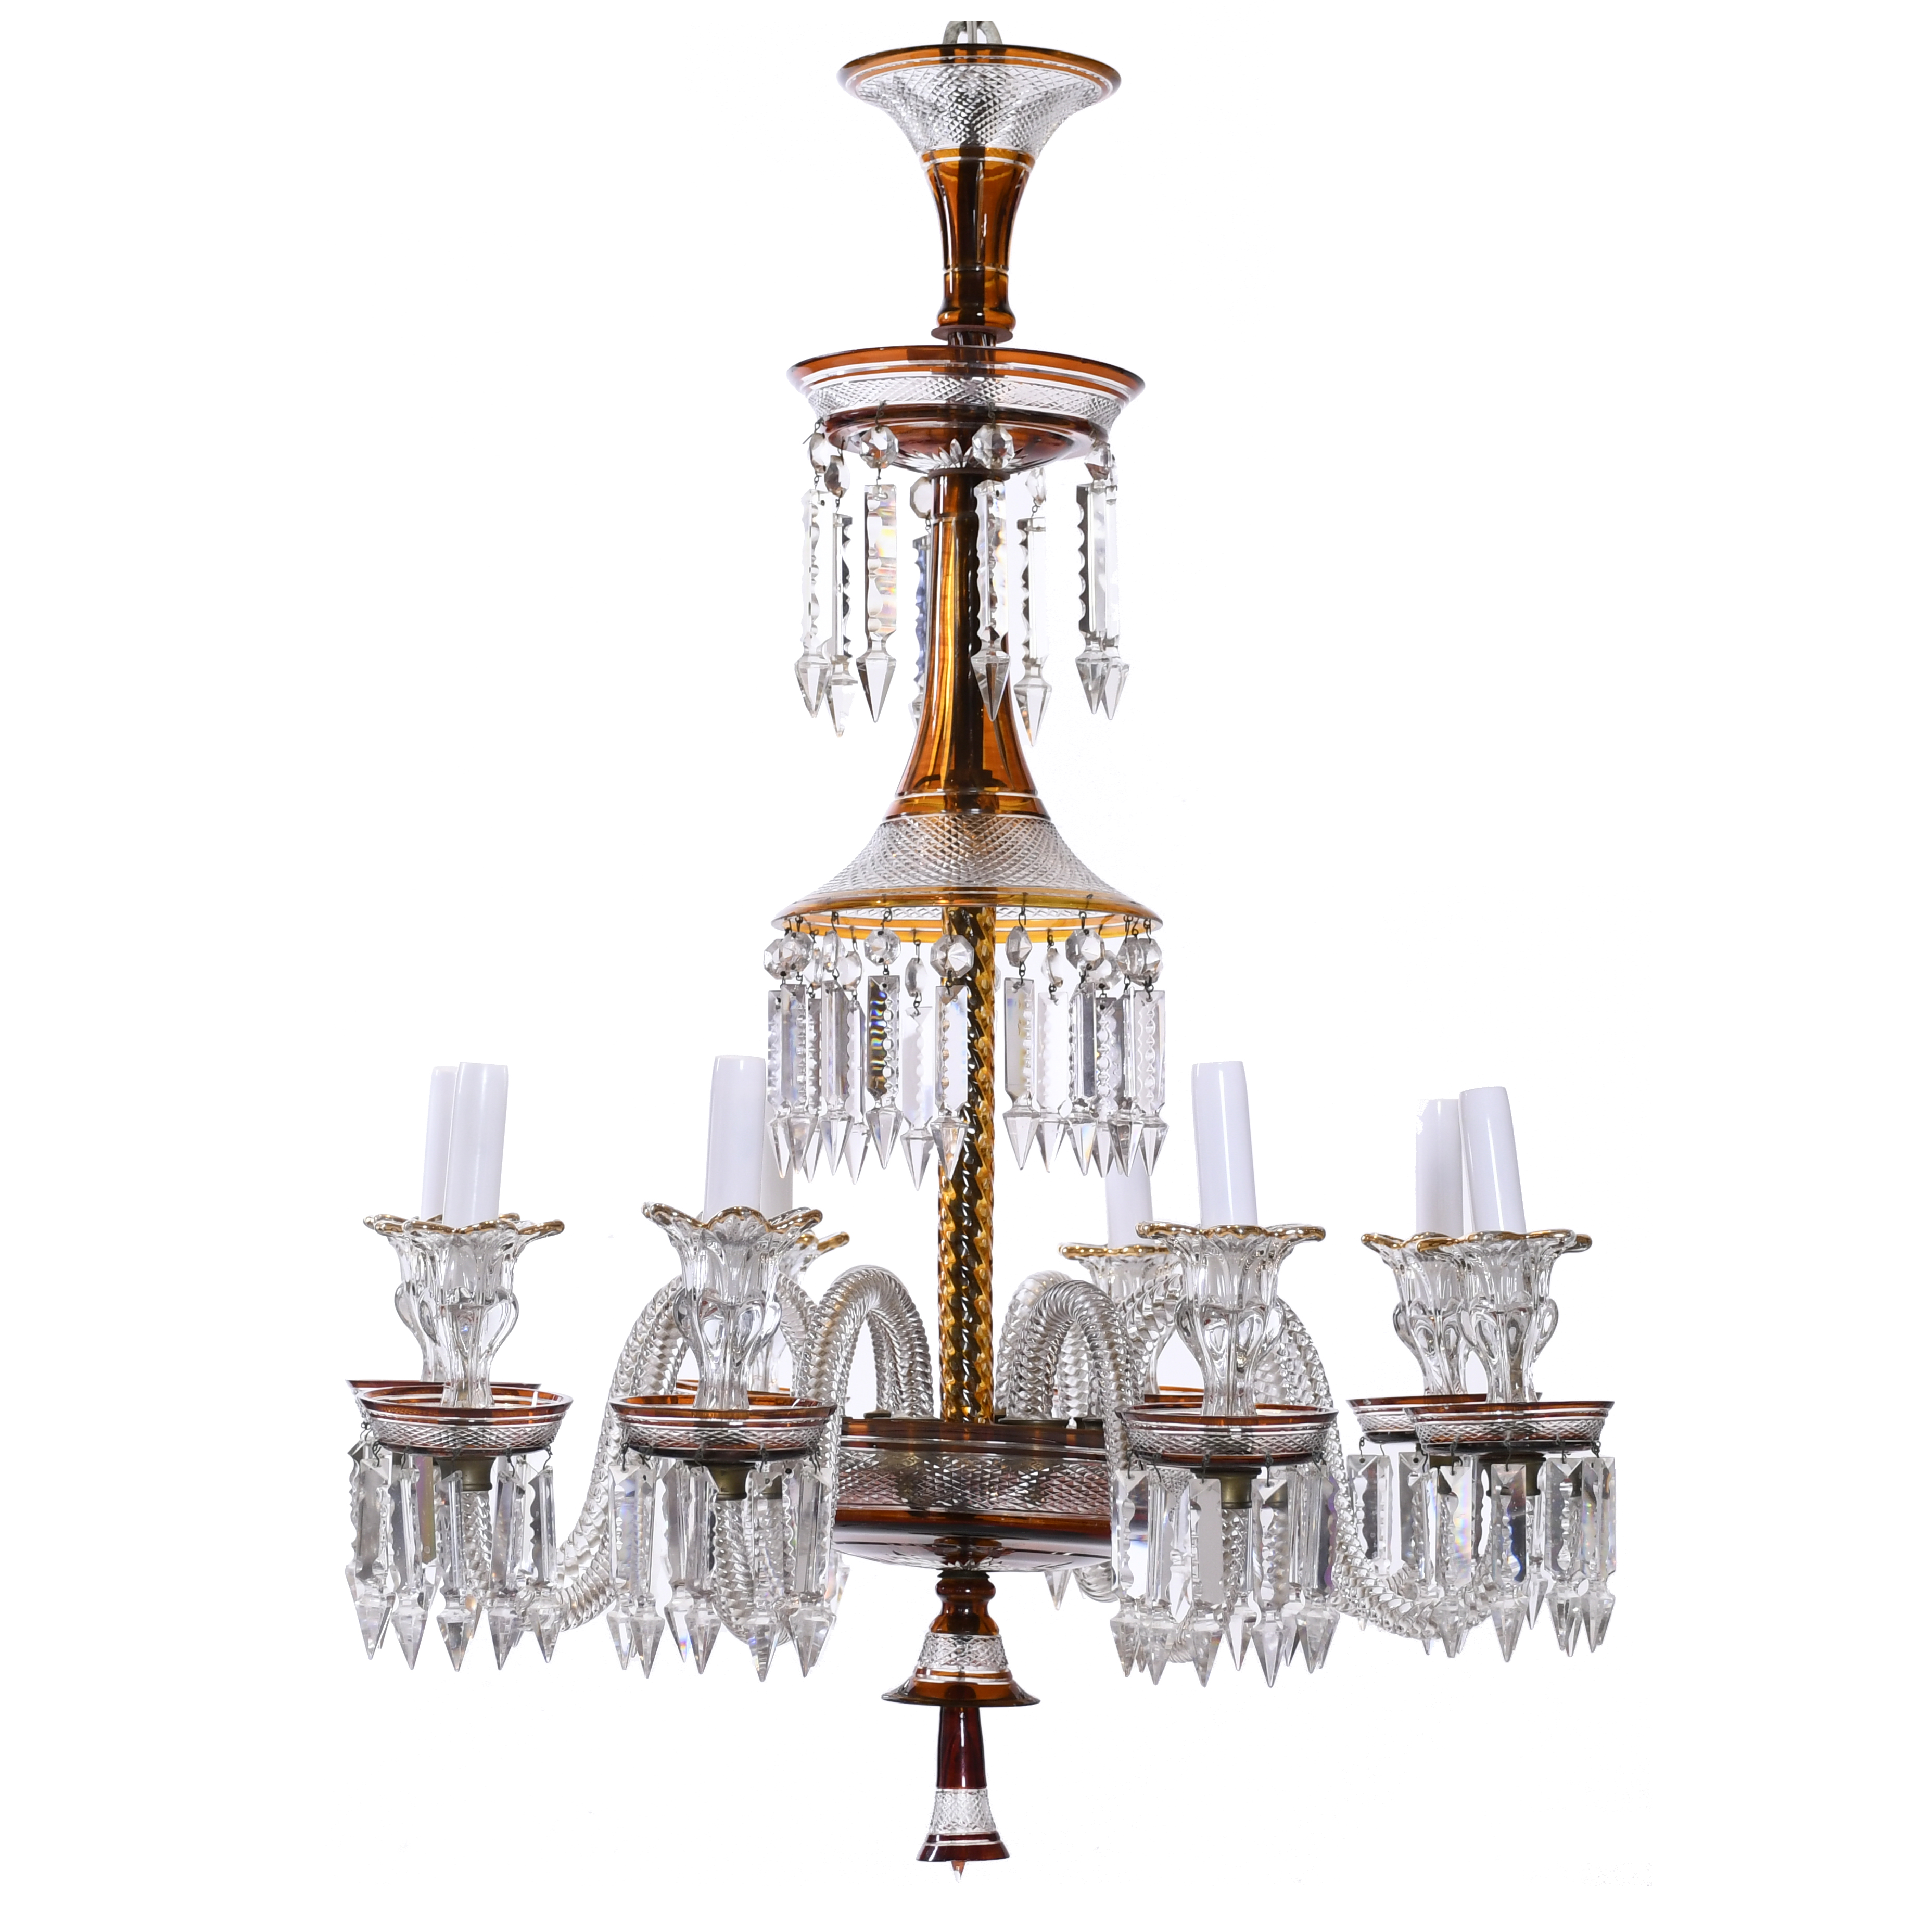 BACCARAT STYLE CEILING LAMP. 20TH CENTURY. 